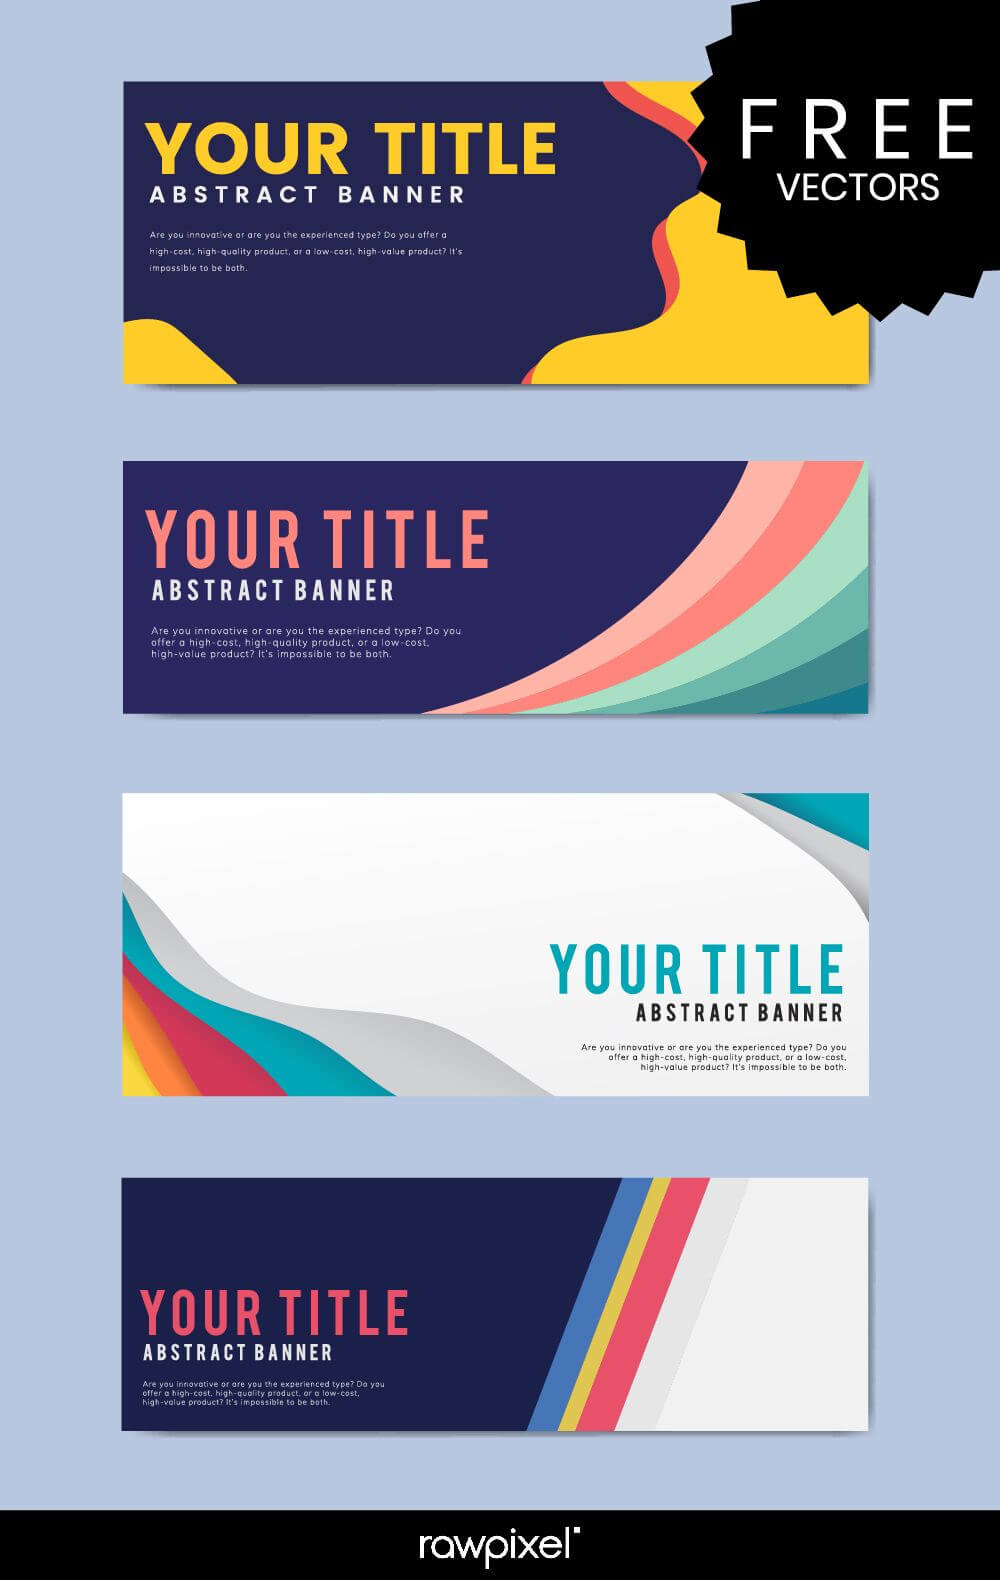 Download Free Modern Business Banner Templates At Rawpixel Throughout Website Banner Templates Free Download